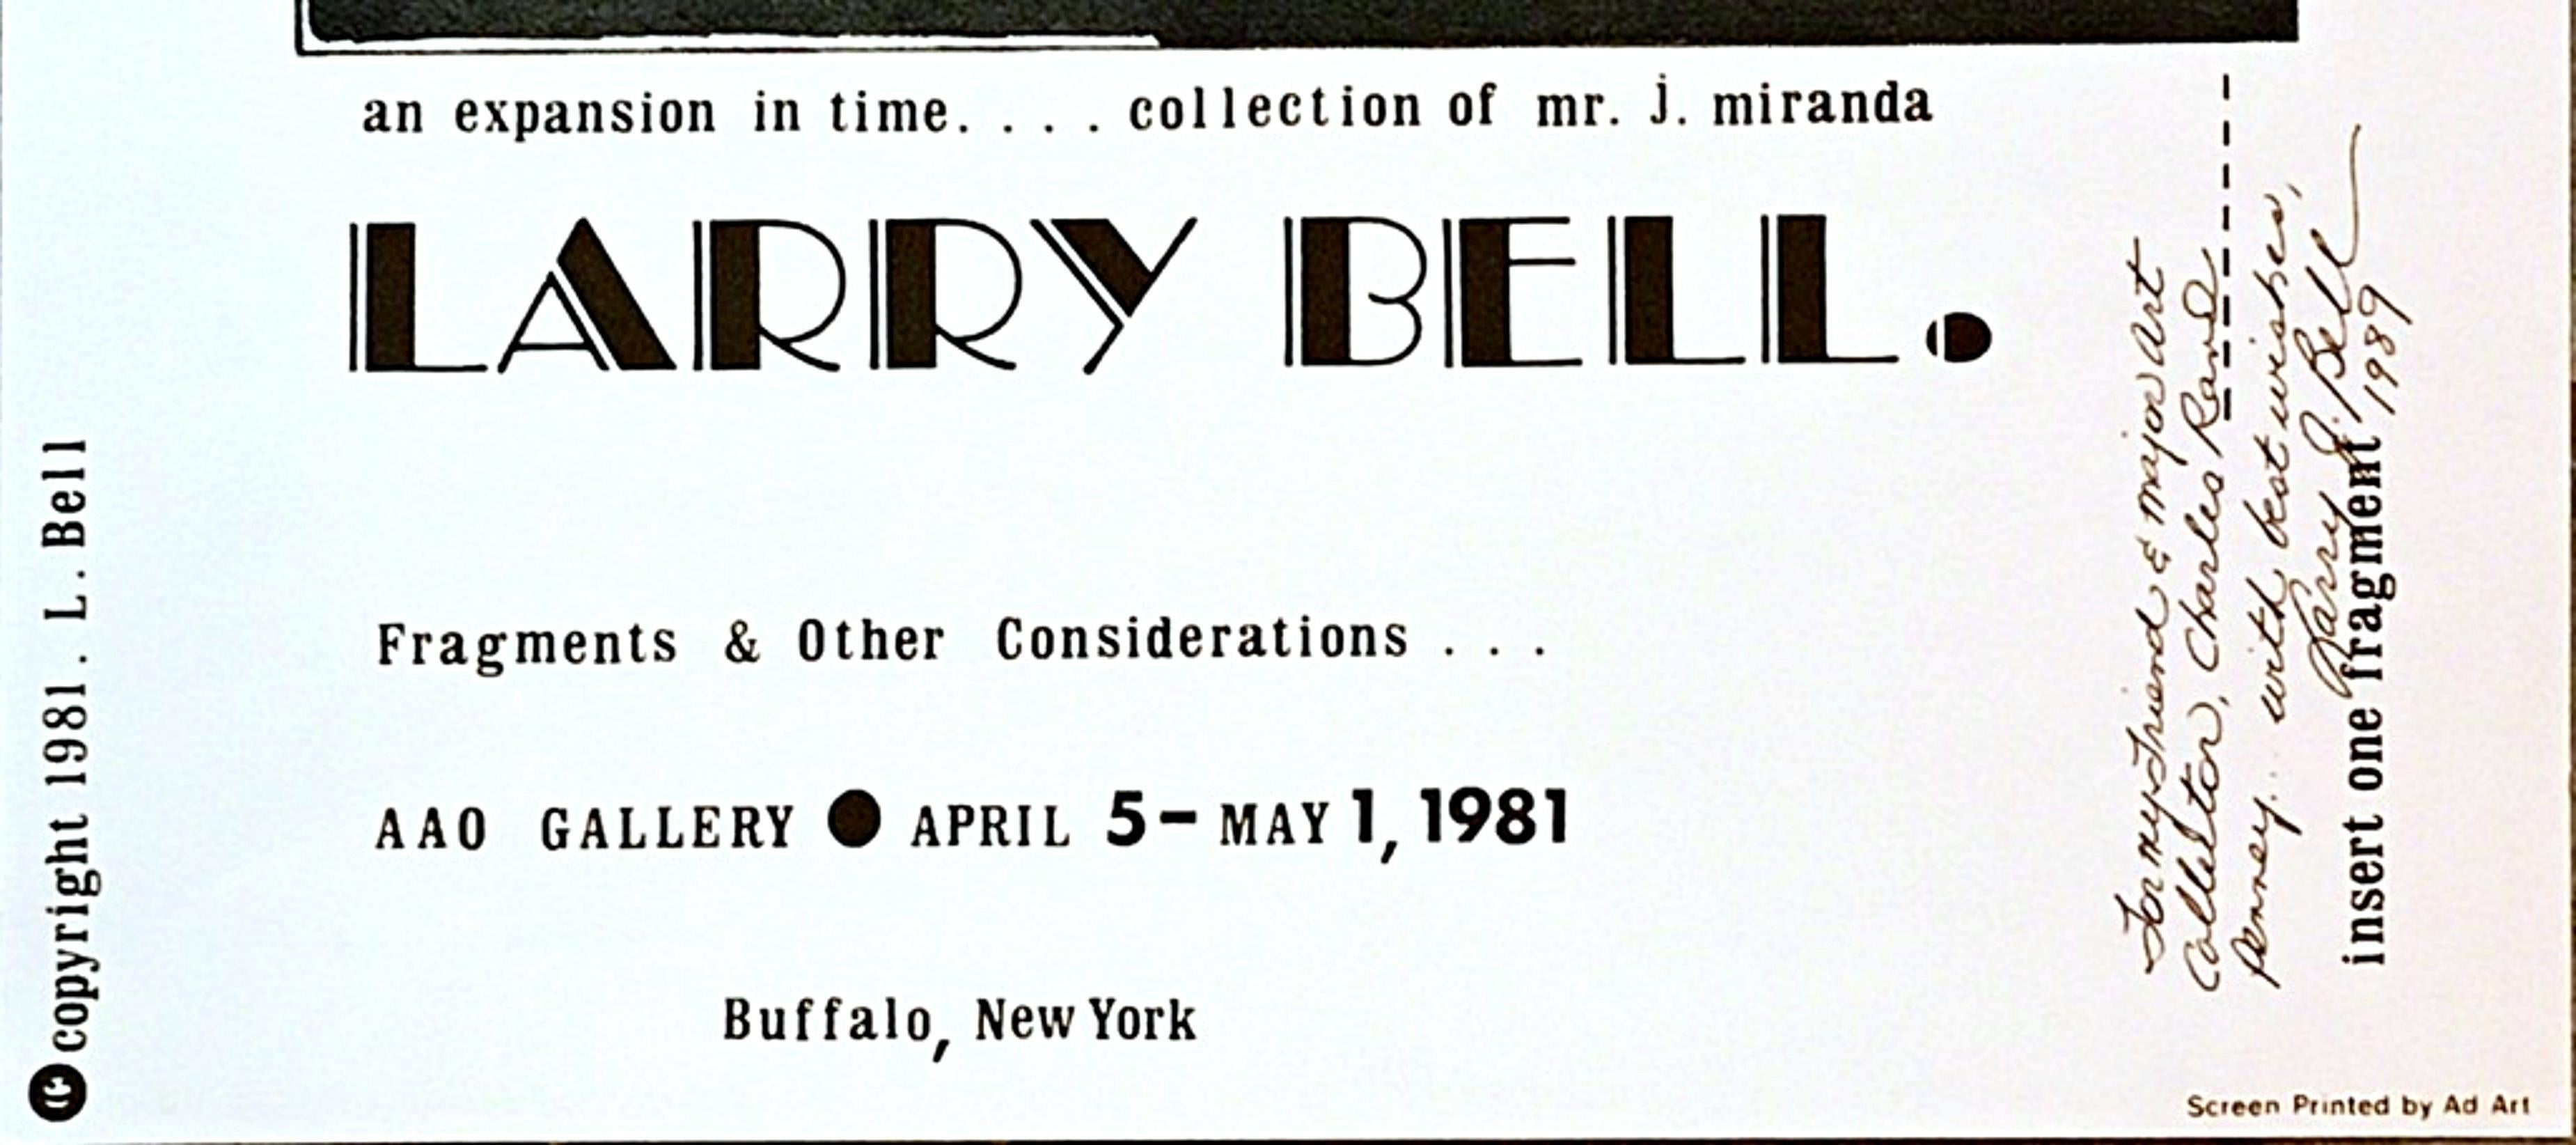 Larry Bell
Hand Signed and Inscribed Poster, 1981
Silkscreen Poster
Hand Signed, inscribed and dated by the artist on the front
16 × 14 inches
Unframed
This uniquely signed vintage silkscreen Larry Bell poster was published on the occasion of his